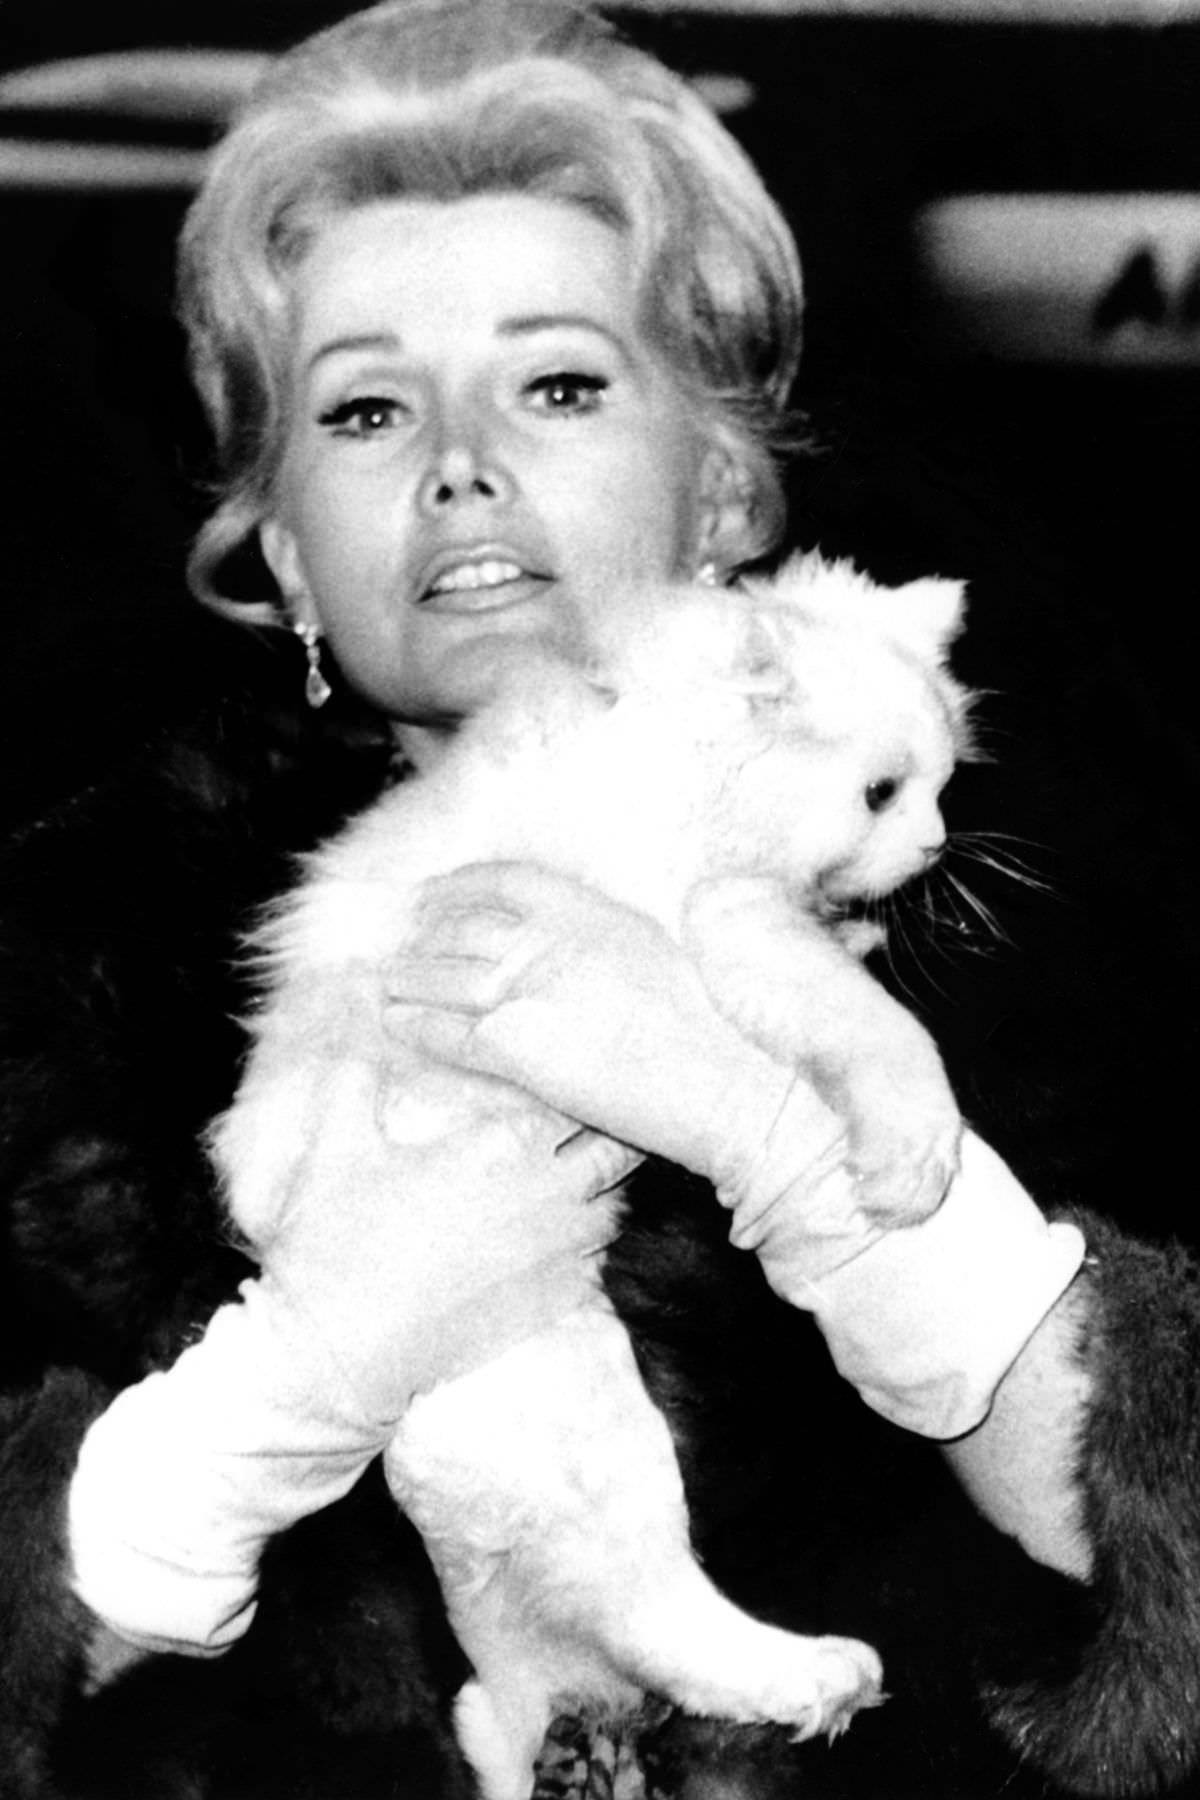 It is unclear who looks more distressed, the socialite Zsa Zsa Gabor or that cat, 1969.